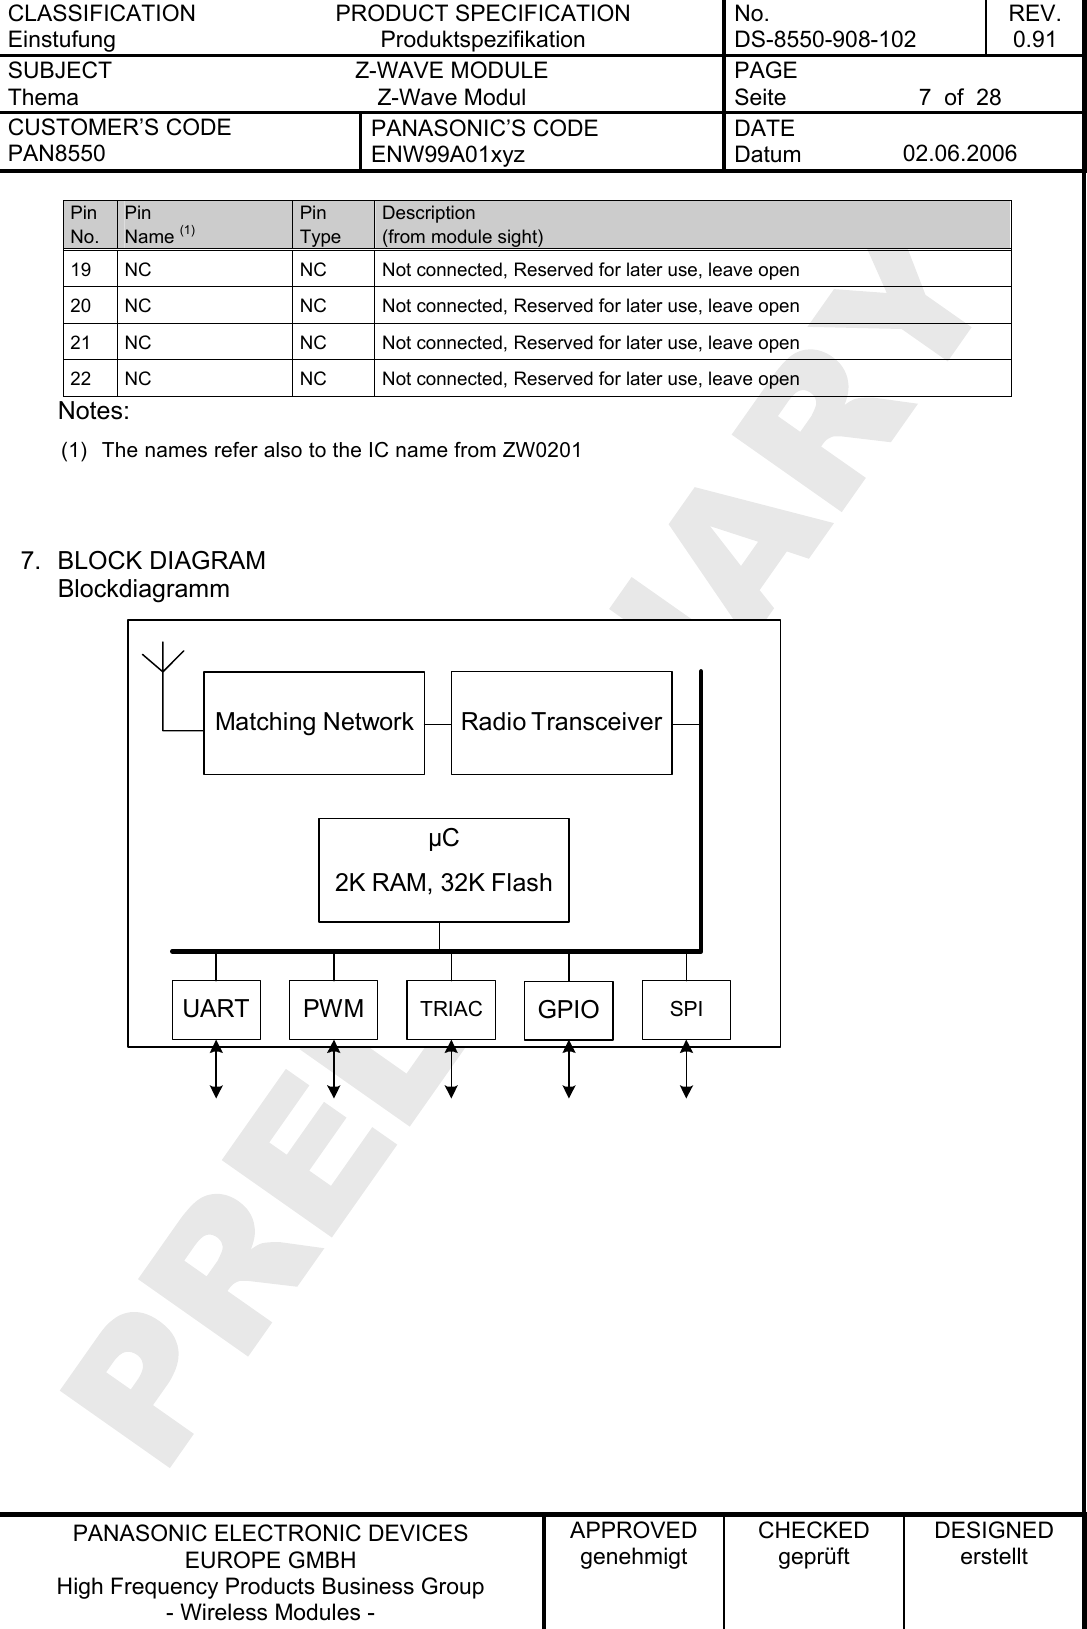 CLASSIFICATION Einstufung PRODUCT SPECIFICATION Produktspezifikation No. DS-8550-908-102 REV. 0.91 SUBJECT Thema Z-WAVE MODULE Z-Wave Modul PAGE Seite  7  of  28 CUSTOMER’S CODE PAN8550 PANASONIC’S CODE ENW99A01xyz DATE Datum  02.06.2006   PANASONIC ELECTRONIC DEVICES EUROPE GMBH High Frequency Products Business Group - Wireless Modules - APPROVED genehmigt CHECKED geprüft DESIGNED erstellt Pin No. Pin Name (1) Pin Type Description (from module sight)  19  NC  NC  Not connected, Reserved for later use, leave open 20  NC  NC  Not connected, Reserved for later use, leave open 21  NC  NC  Not connected, Reserved for later use, leave open 22  NC  NC  Not connected, Reserved for later use, leave open Notes: (1)  The names refer also to the IC name from ZW0201   7. BLOCK DIAGRAM Blockdiagramm µC2K RAM, 32K FlashRadio TransceiverMatching NetworkUART TRIACPWM SPIGPIO  